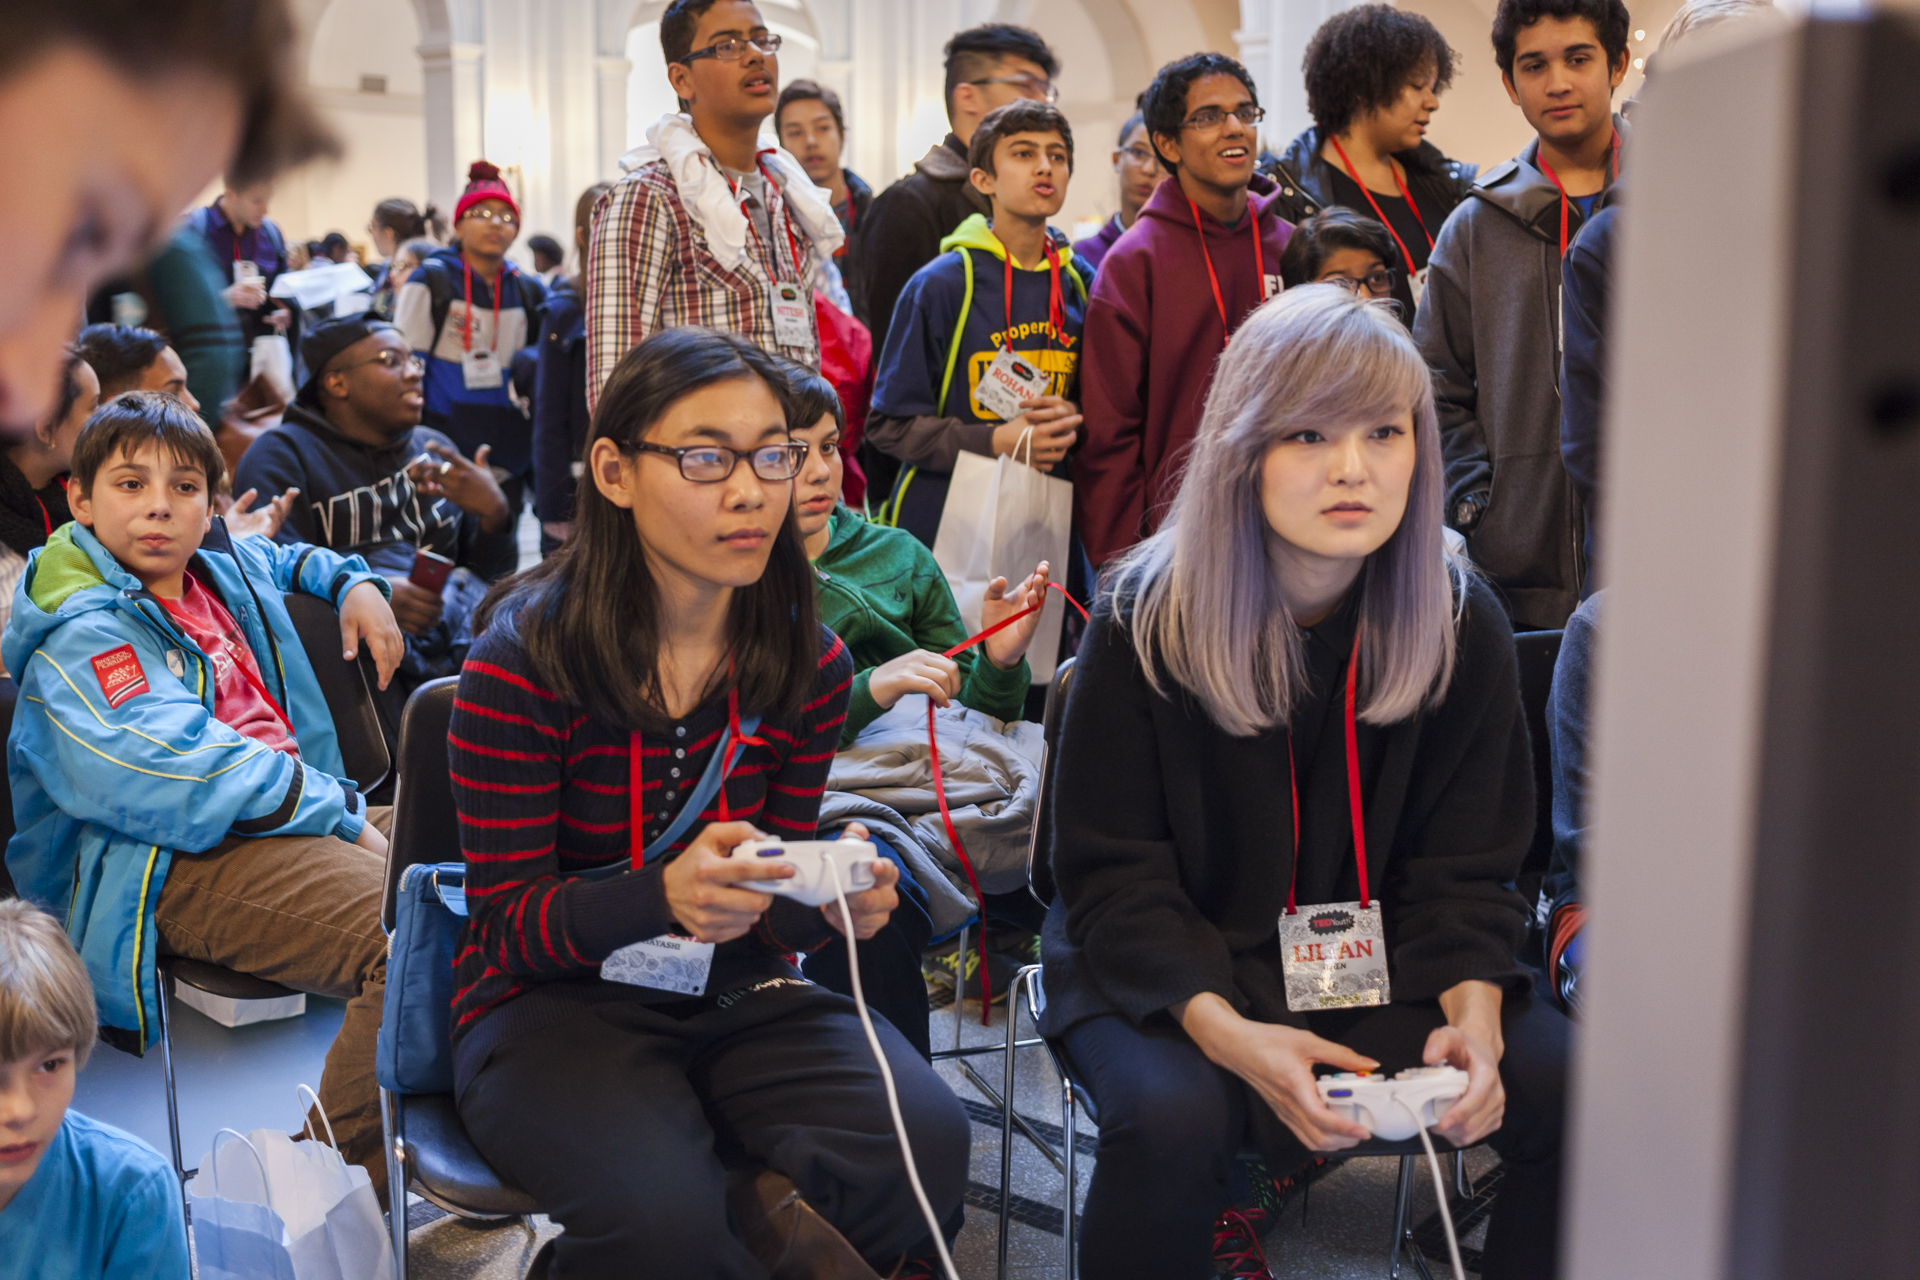 Super Smash Bros. Melee champion Lilian Chen, also known as Milktea, plays against an attendee. Who actually lasted pretty long before being beat. Photo: Dian Lofton/TED